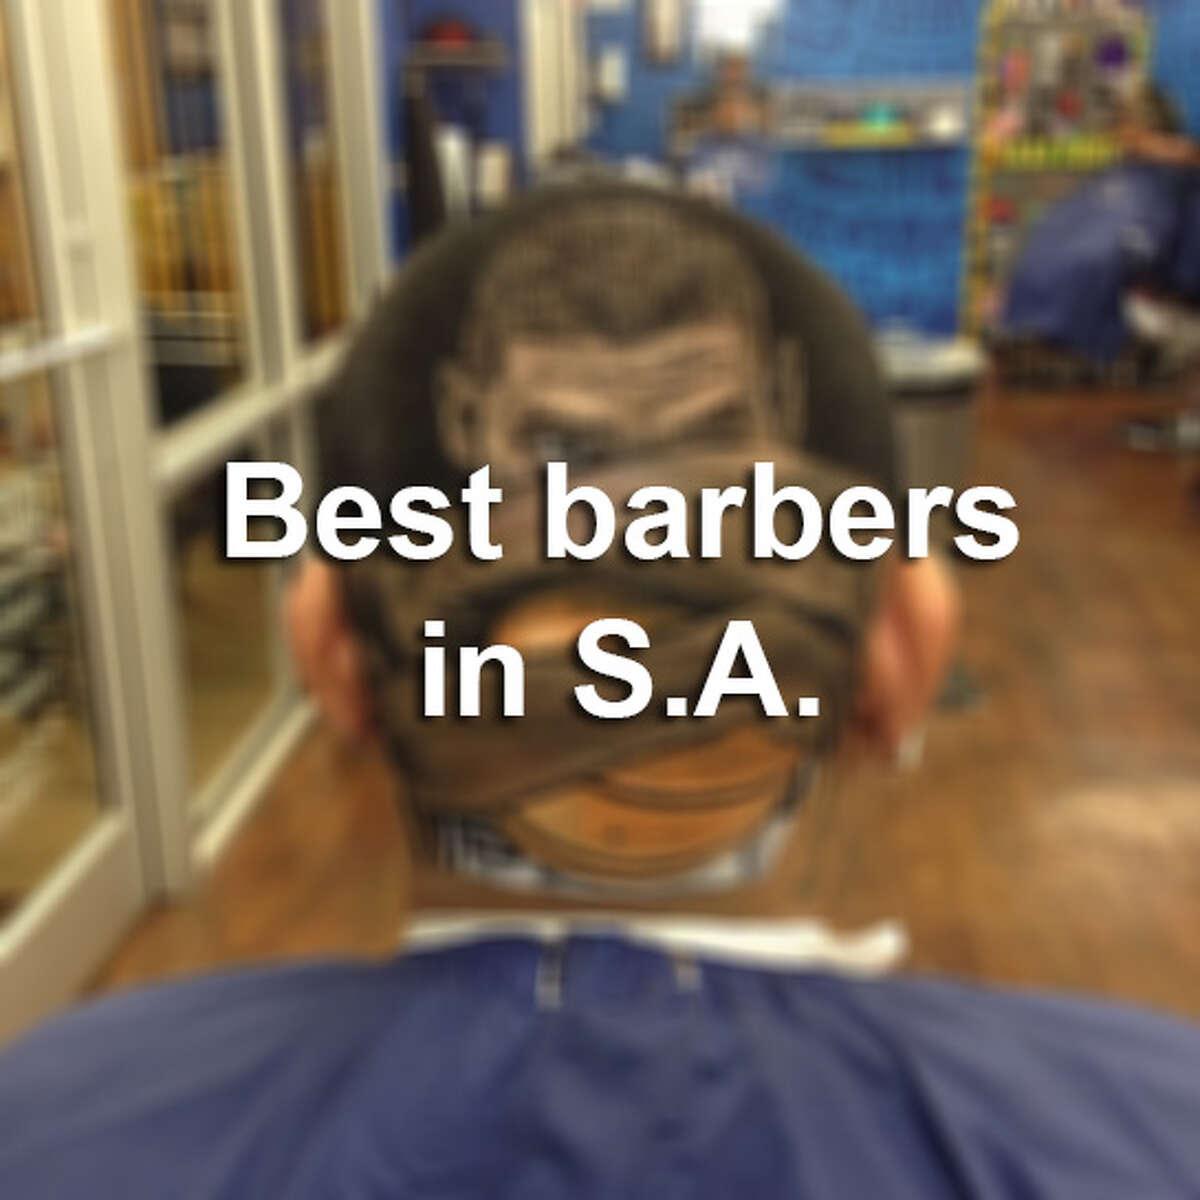 Click through the slideshow to see some of the best barbers in San Antonio.